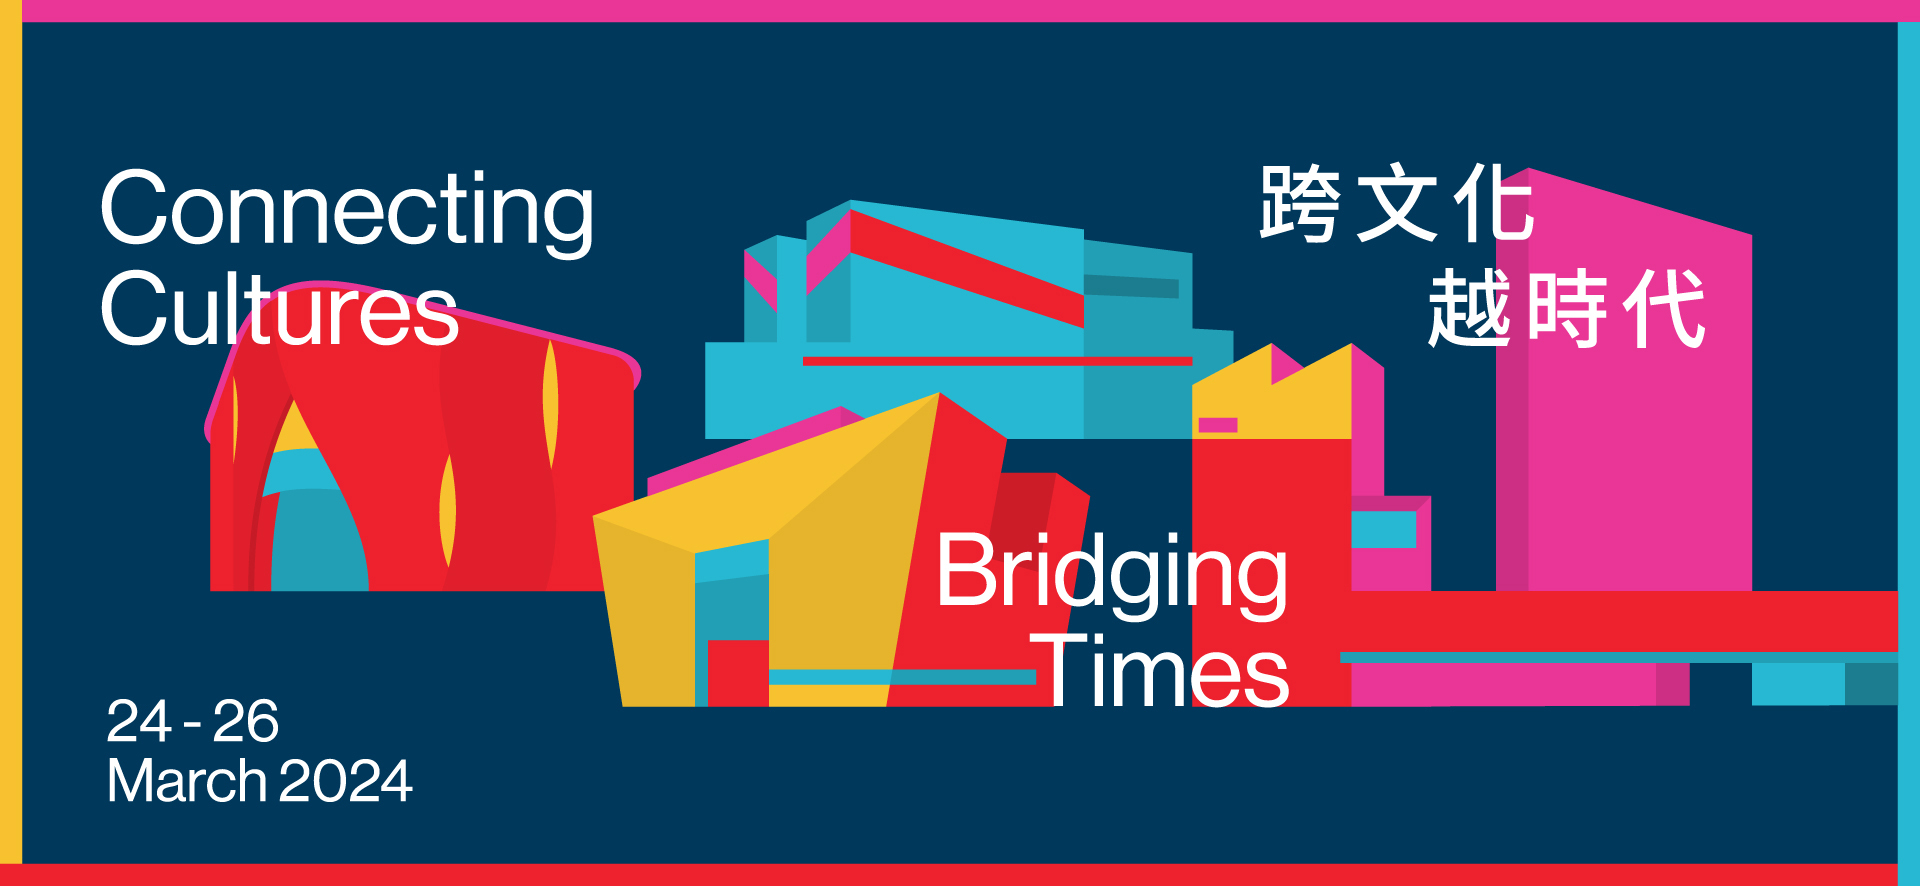 International Cultural summit 2024 - Connecting cultures, Bridging times